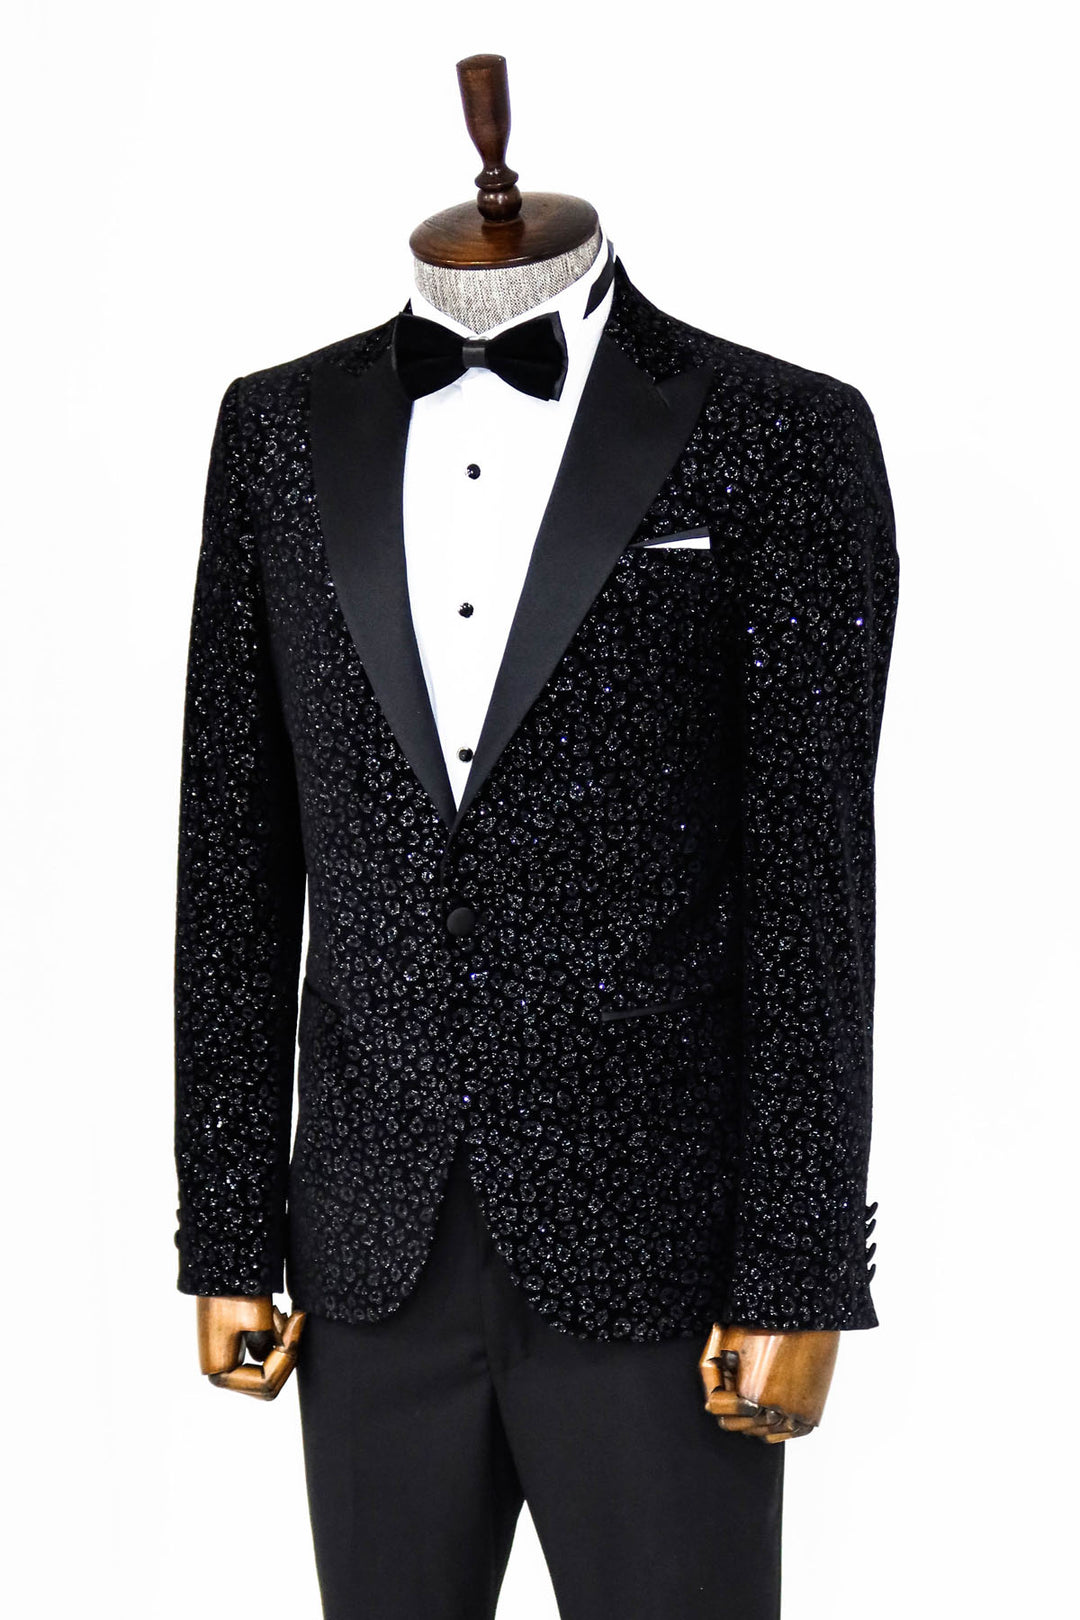 Leopard Pattern Slim Fit Black Men Prom Blazer and Trousers Combination - Wessi